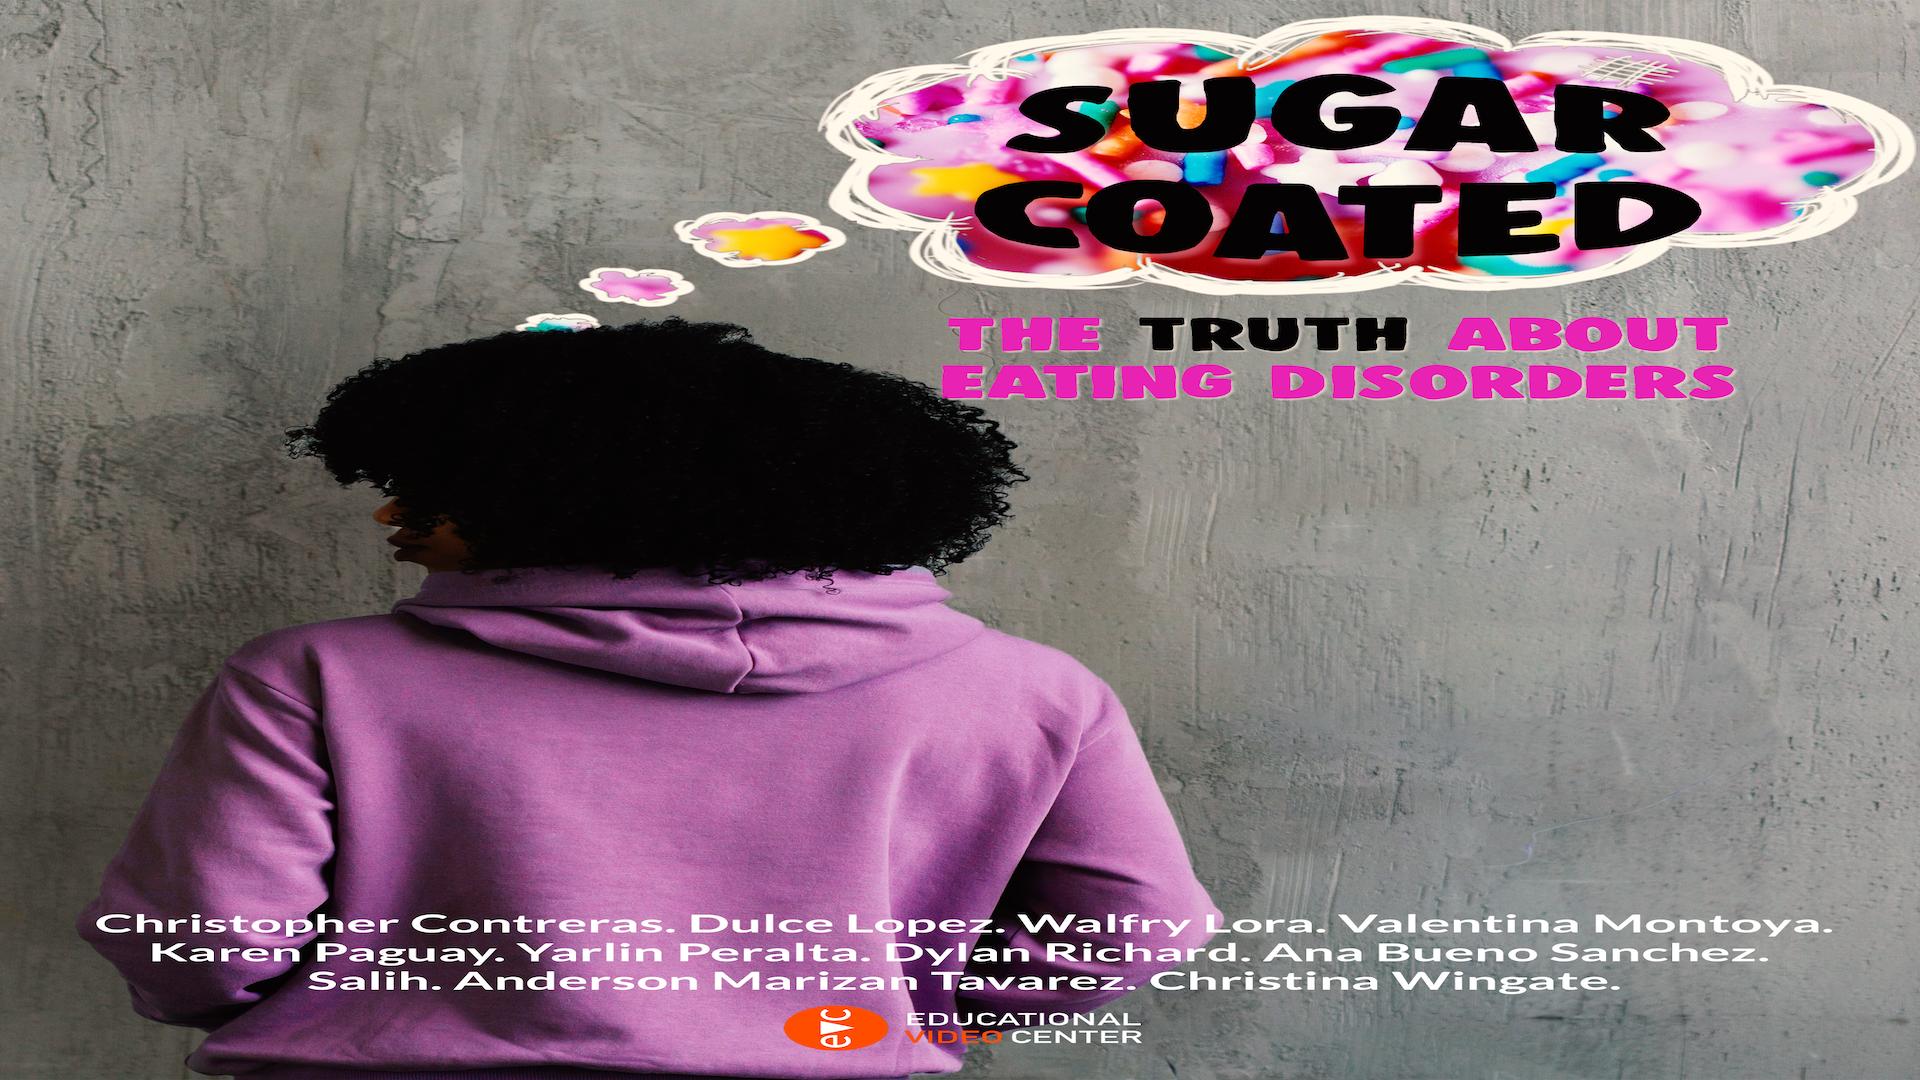 Sugar Coated: The Truth About Eating Disorders